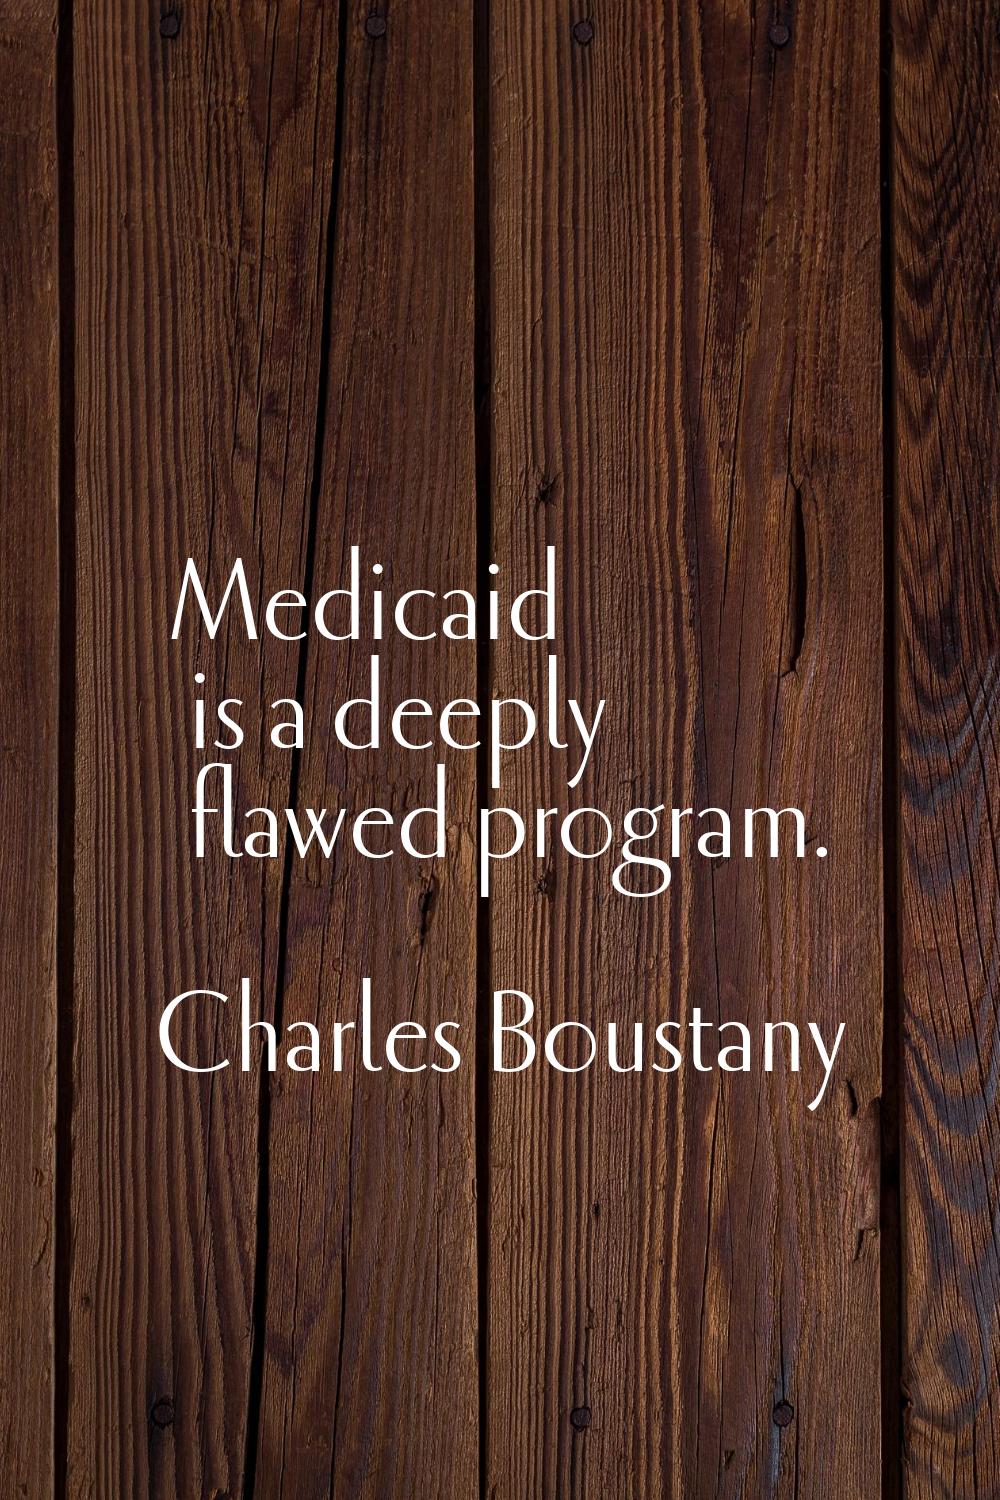 Medicaid is a deeply flawed program.